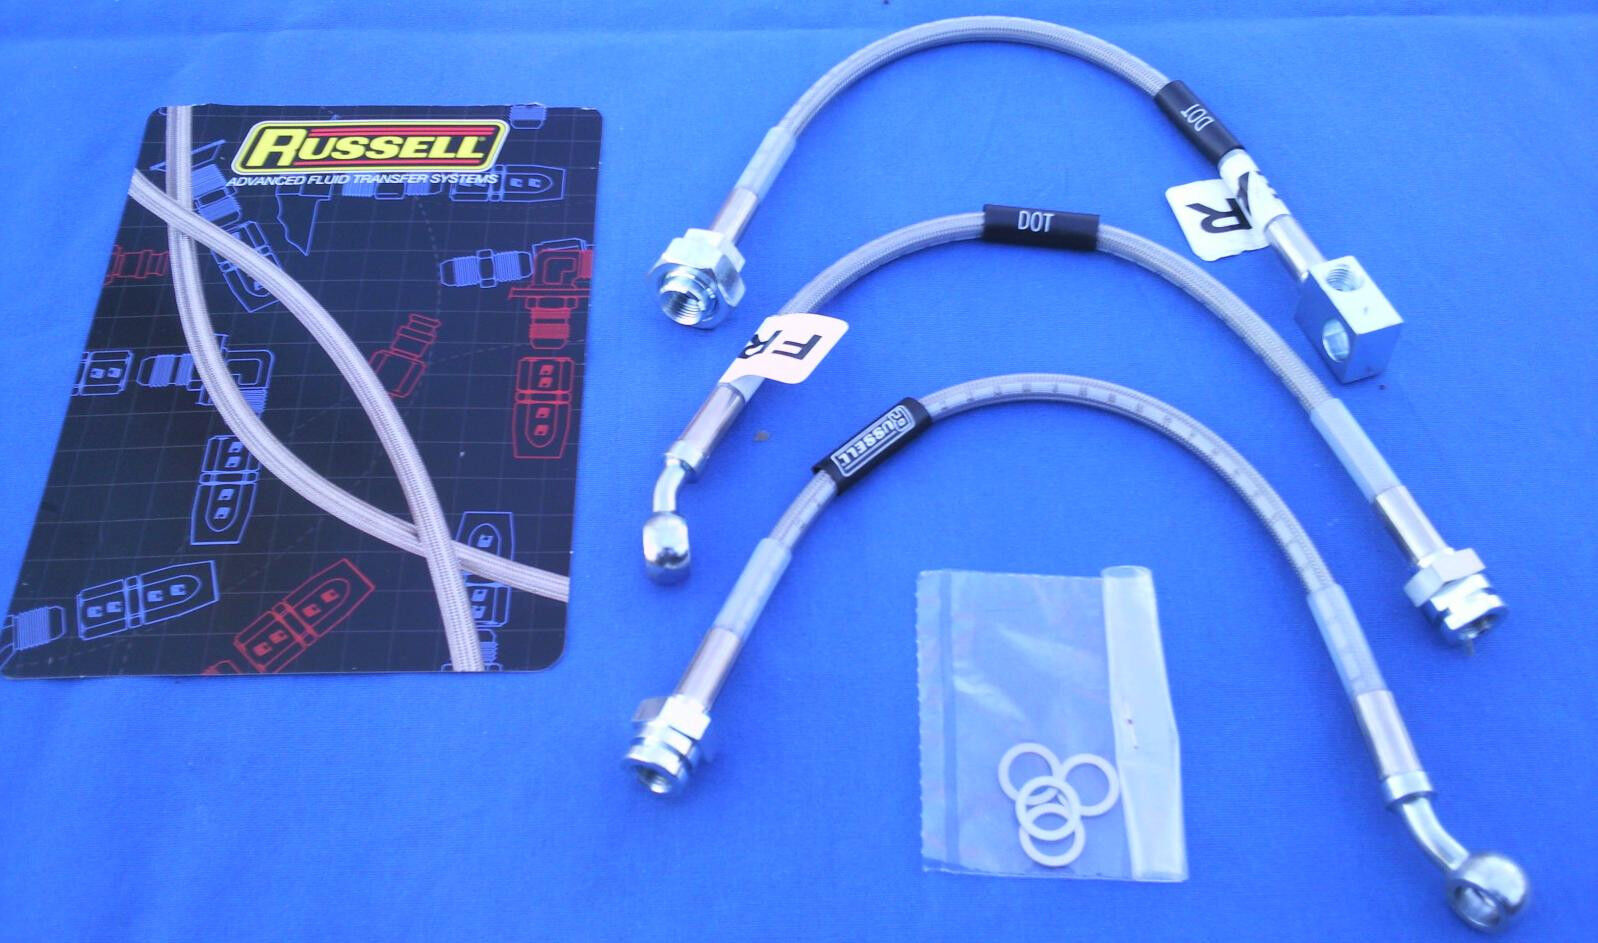 Buick Grand National- Regal - Stainless Braided Brake Lines - DOT LEGAL 3PC Kit